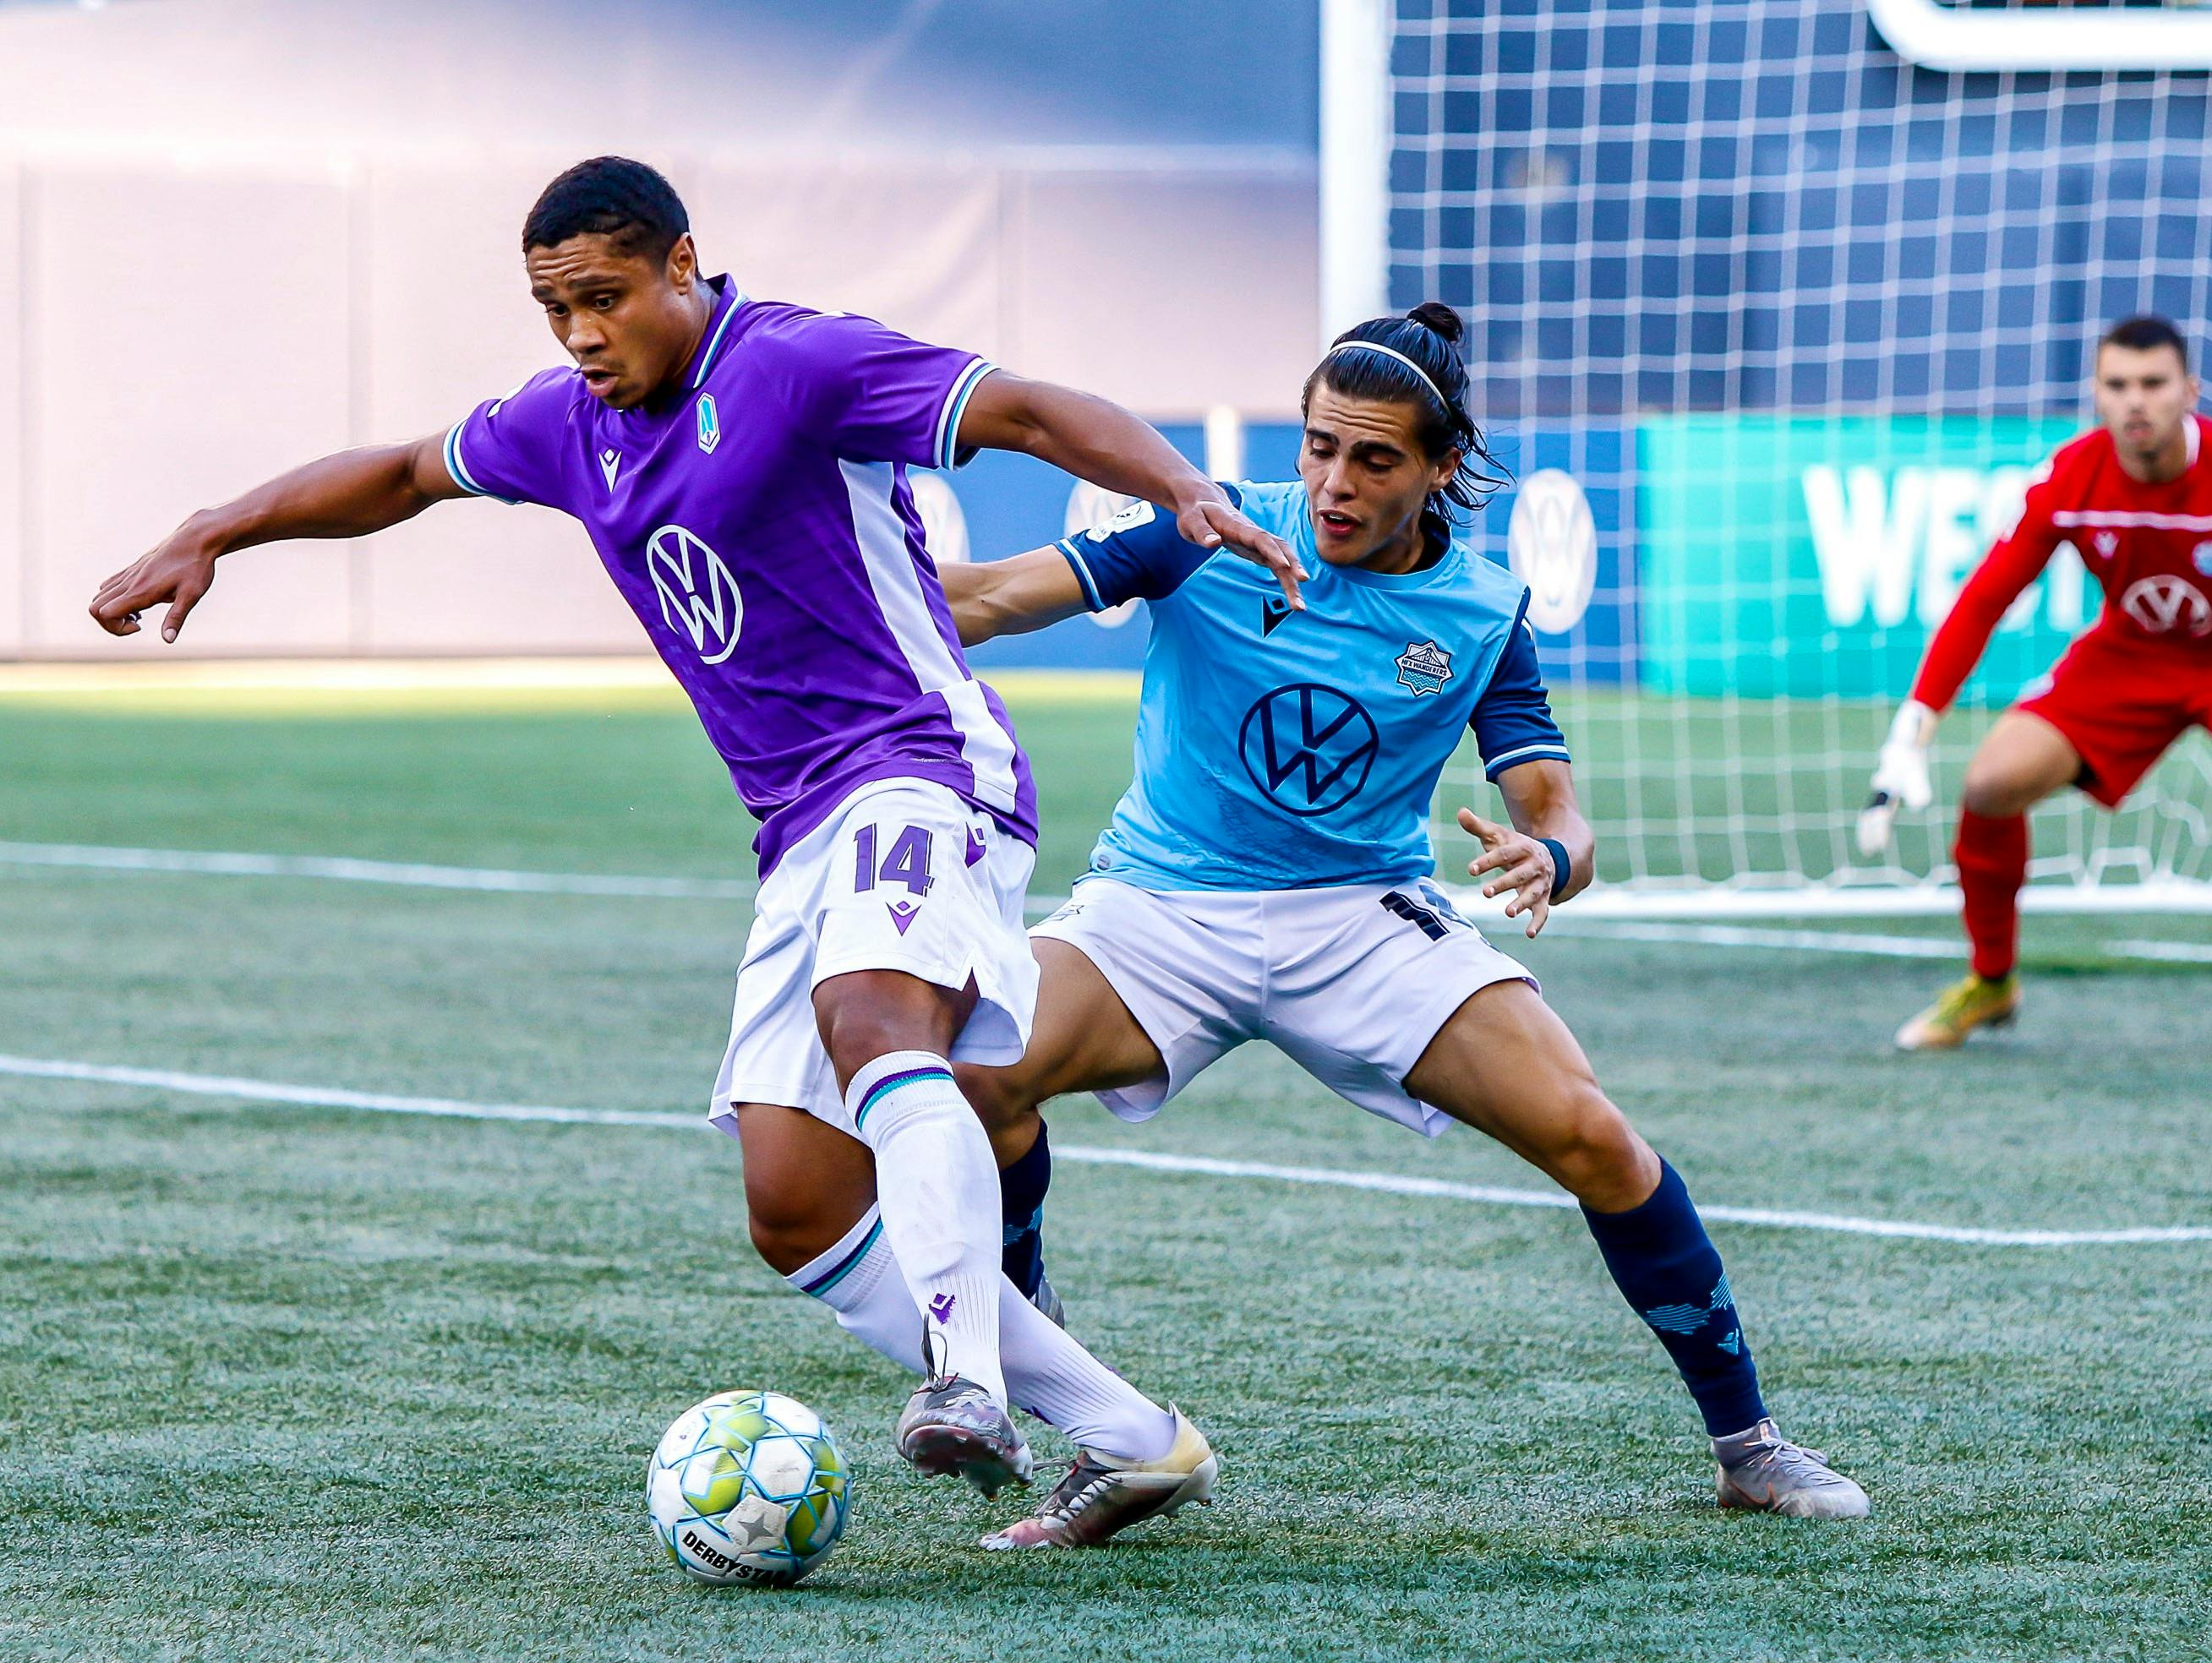 HFX Wanderers' Mateo Restrepo defends against Terran Campbell of Pacific FC as Wanderers keeper Christian Oxner looks on during a Canadian Premier League match Tuesday evening in Winnipeg. - Canadian Premier League